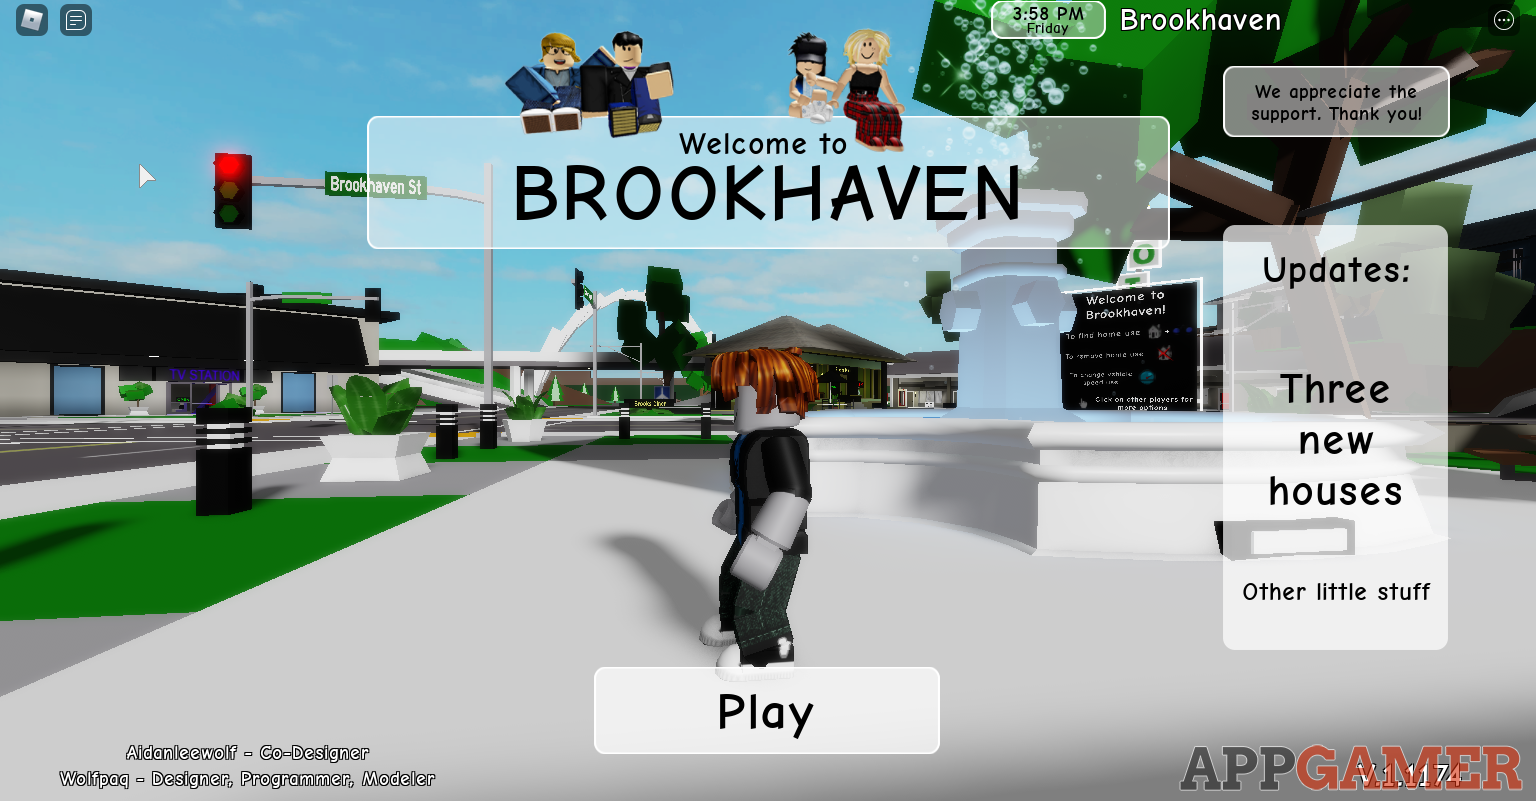 Brookhaven Codes July 2021 Roblox - what are some codes for roblox brookhaven